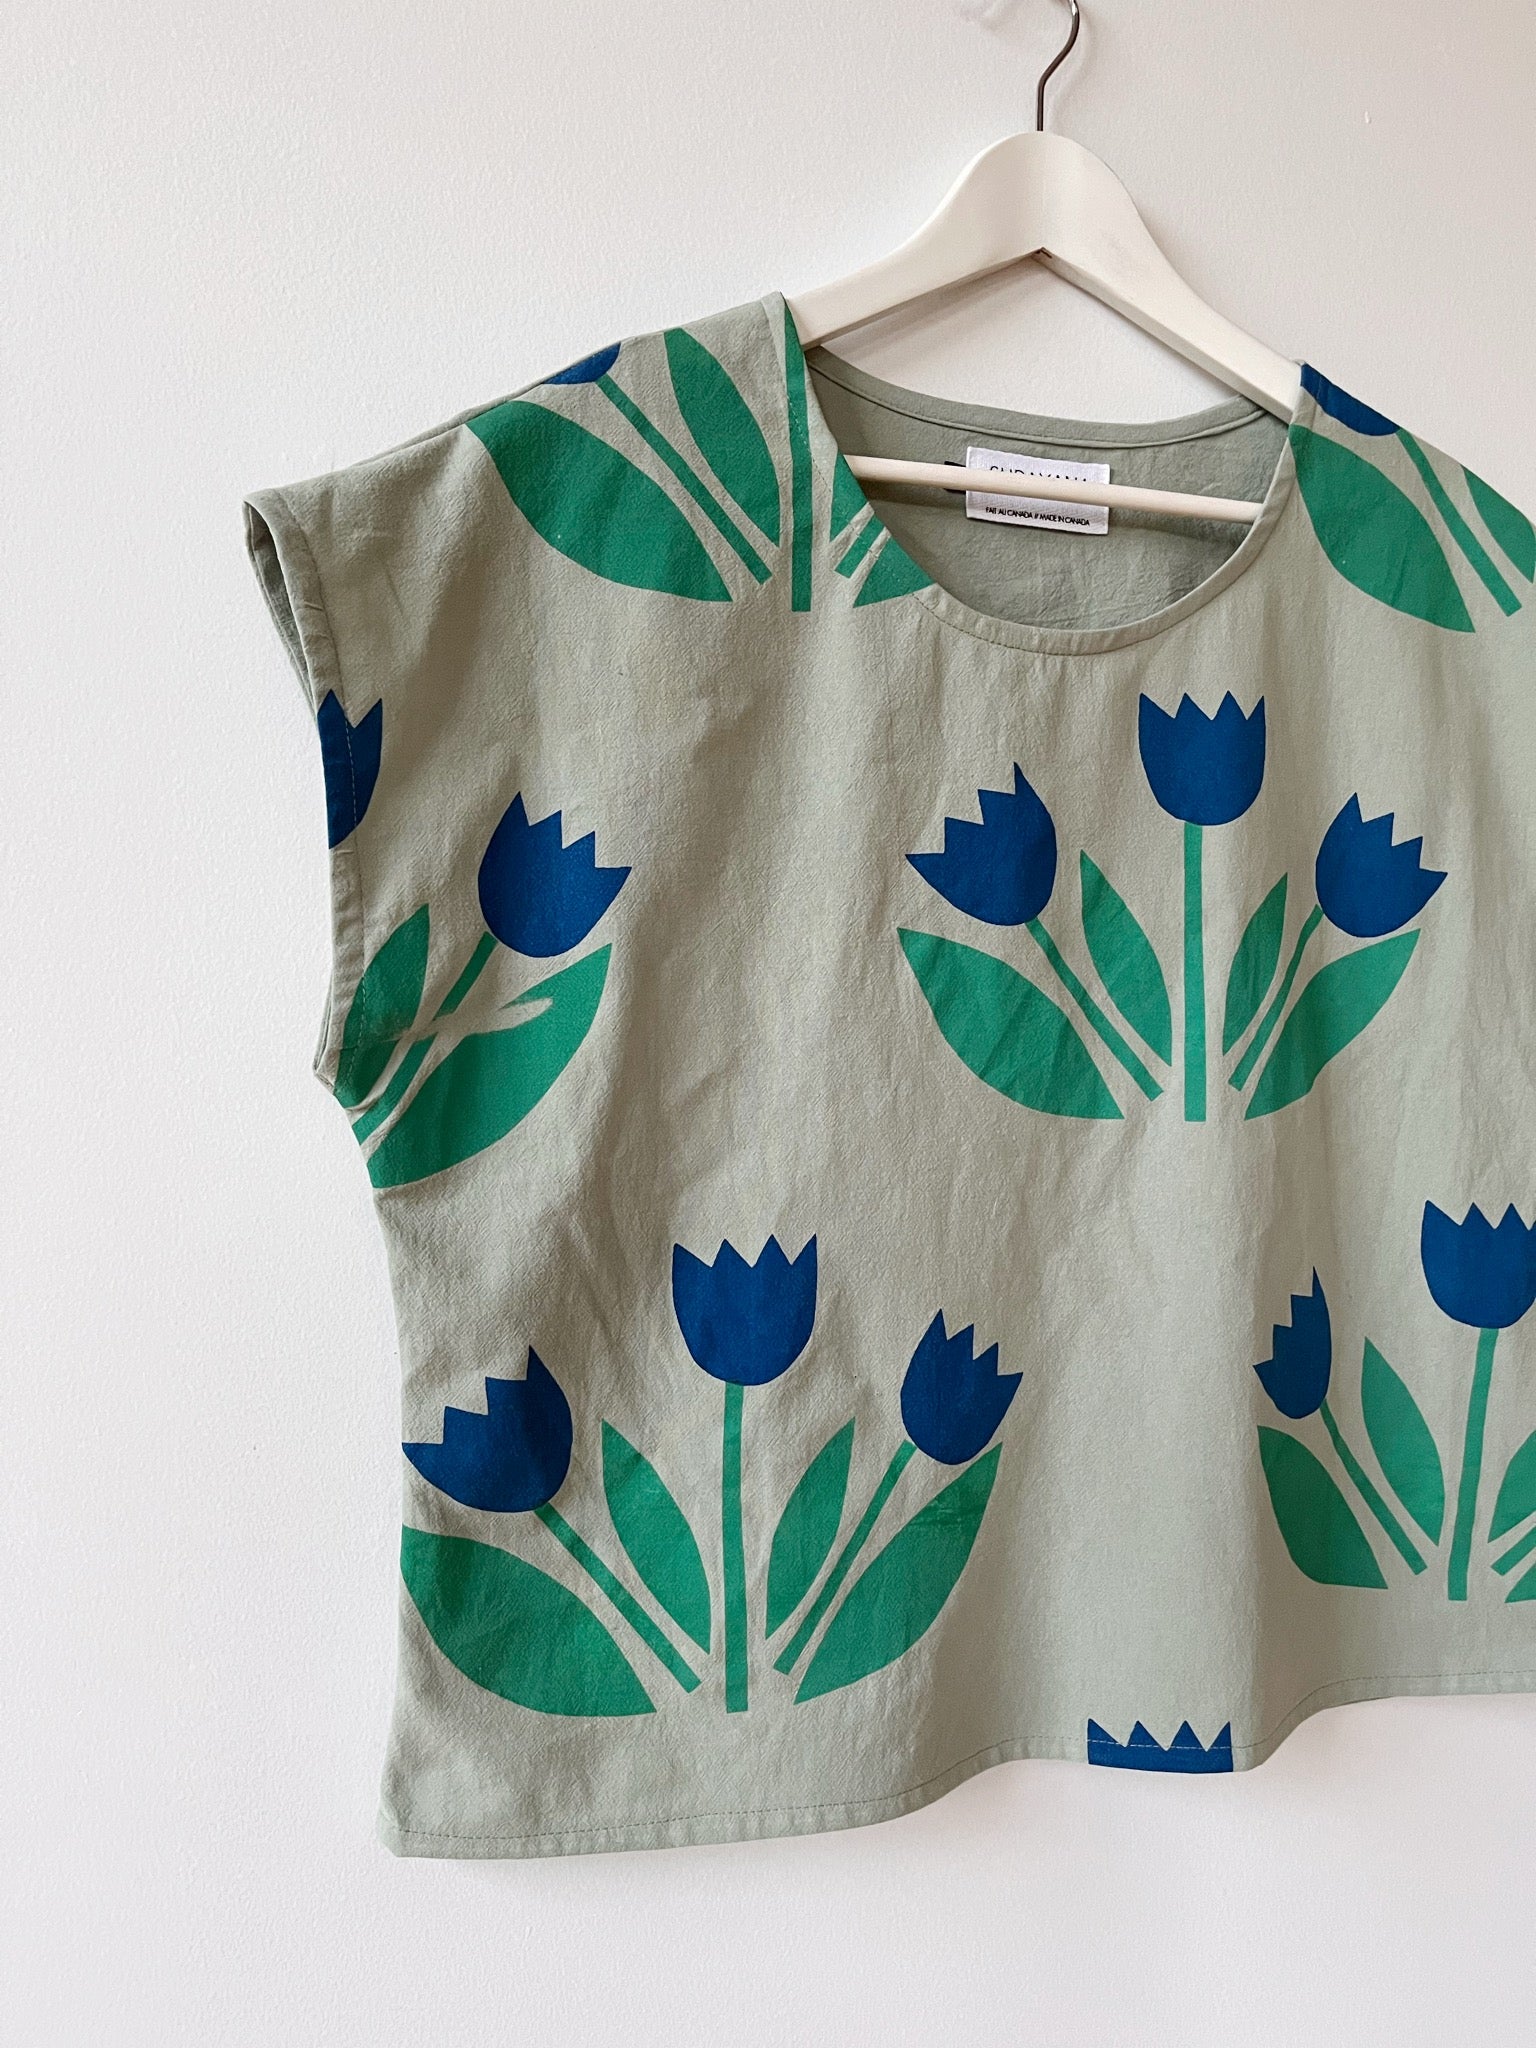 OOAK hand-printed tulip top size M/L ready to ship